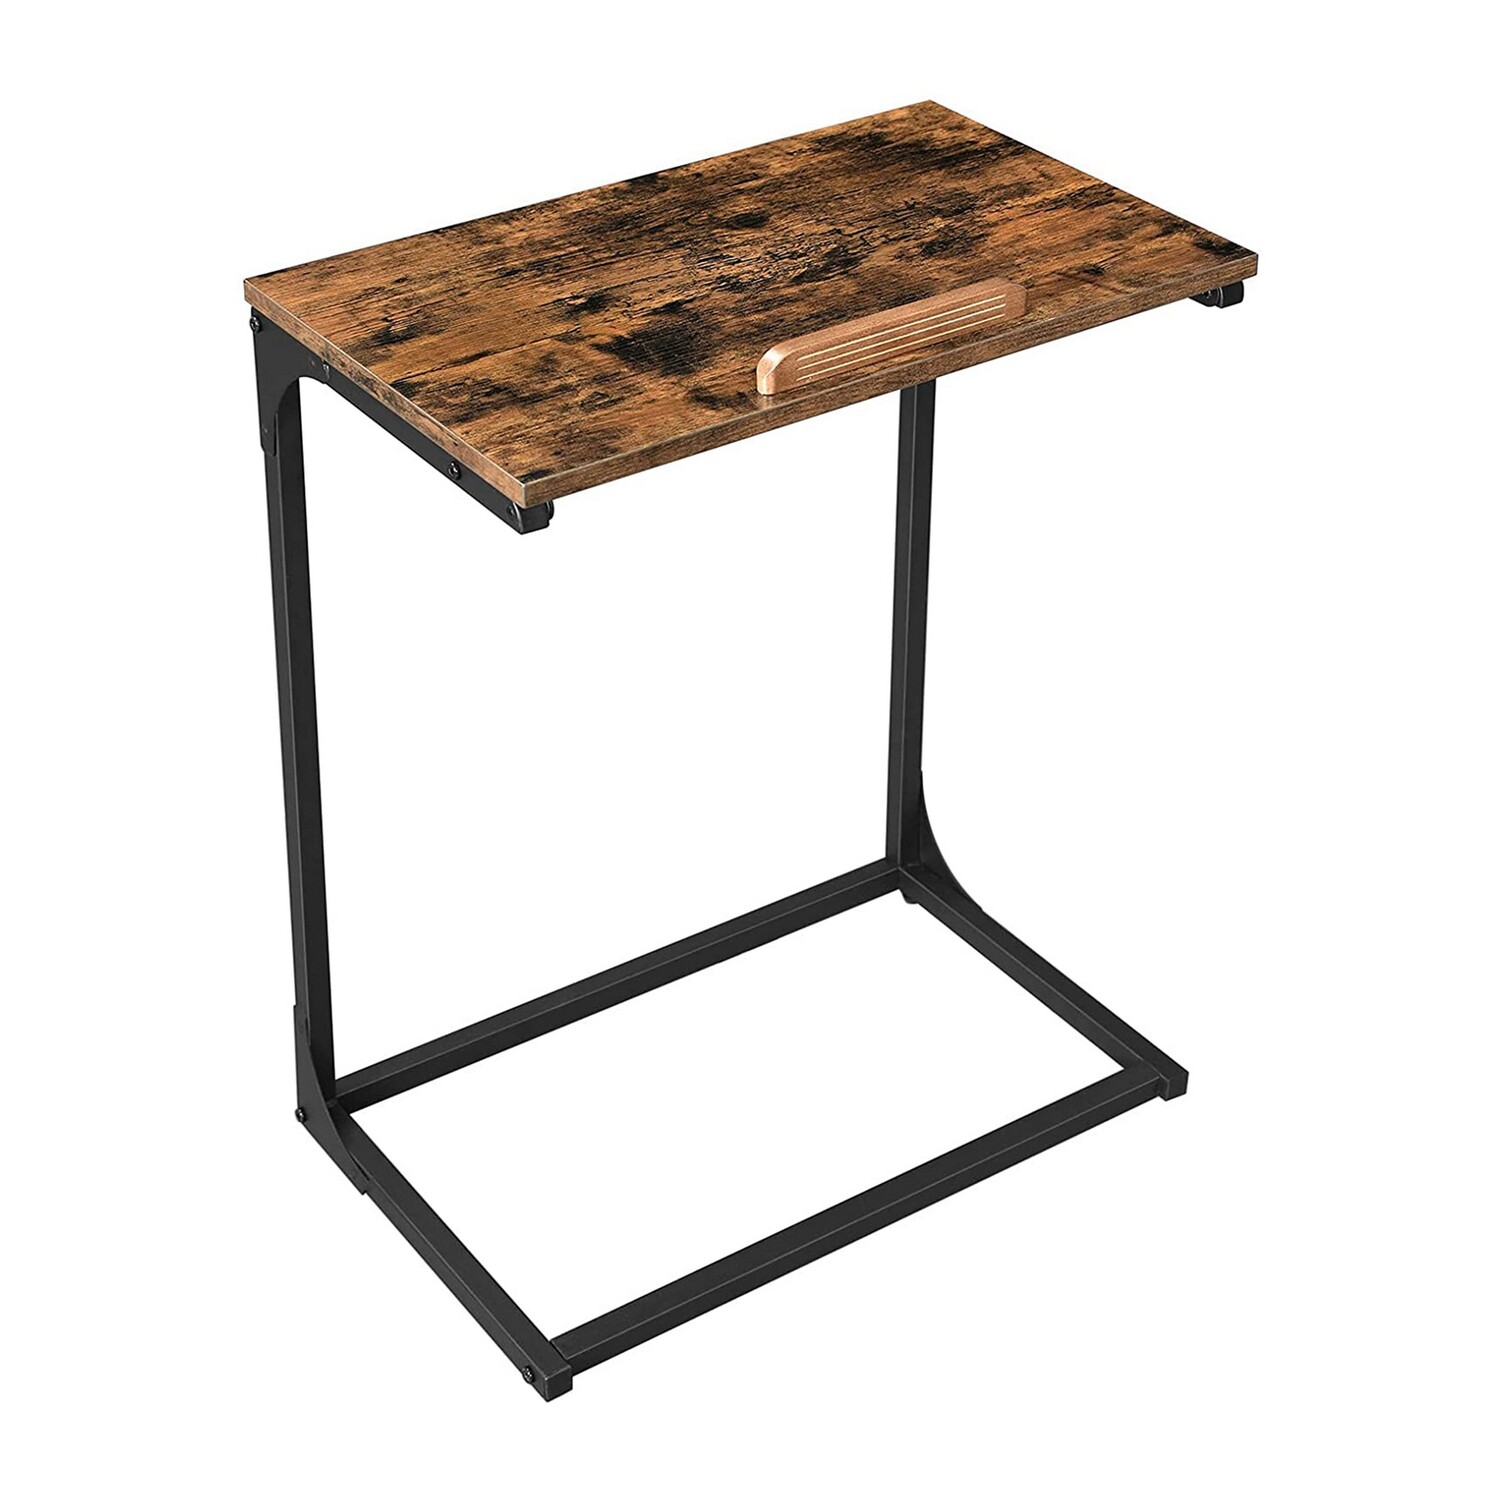 Metal Laptop Table with Tilting Wooden Top and Grains, Brown and Black - image 1 of 5